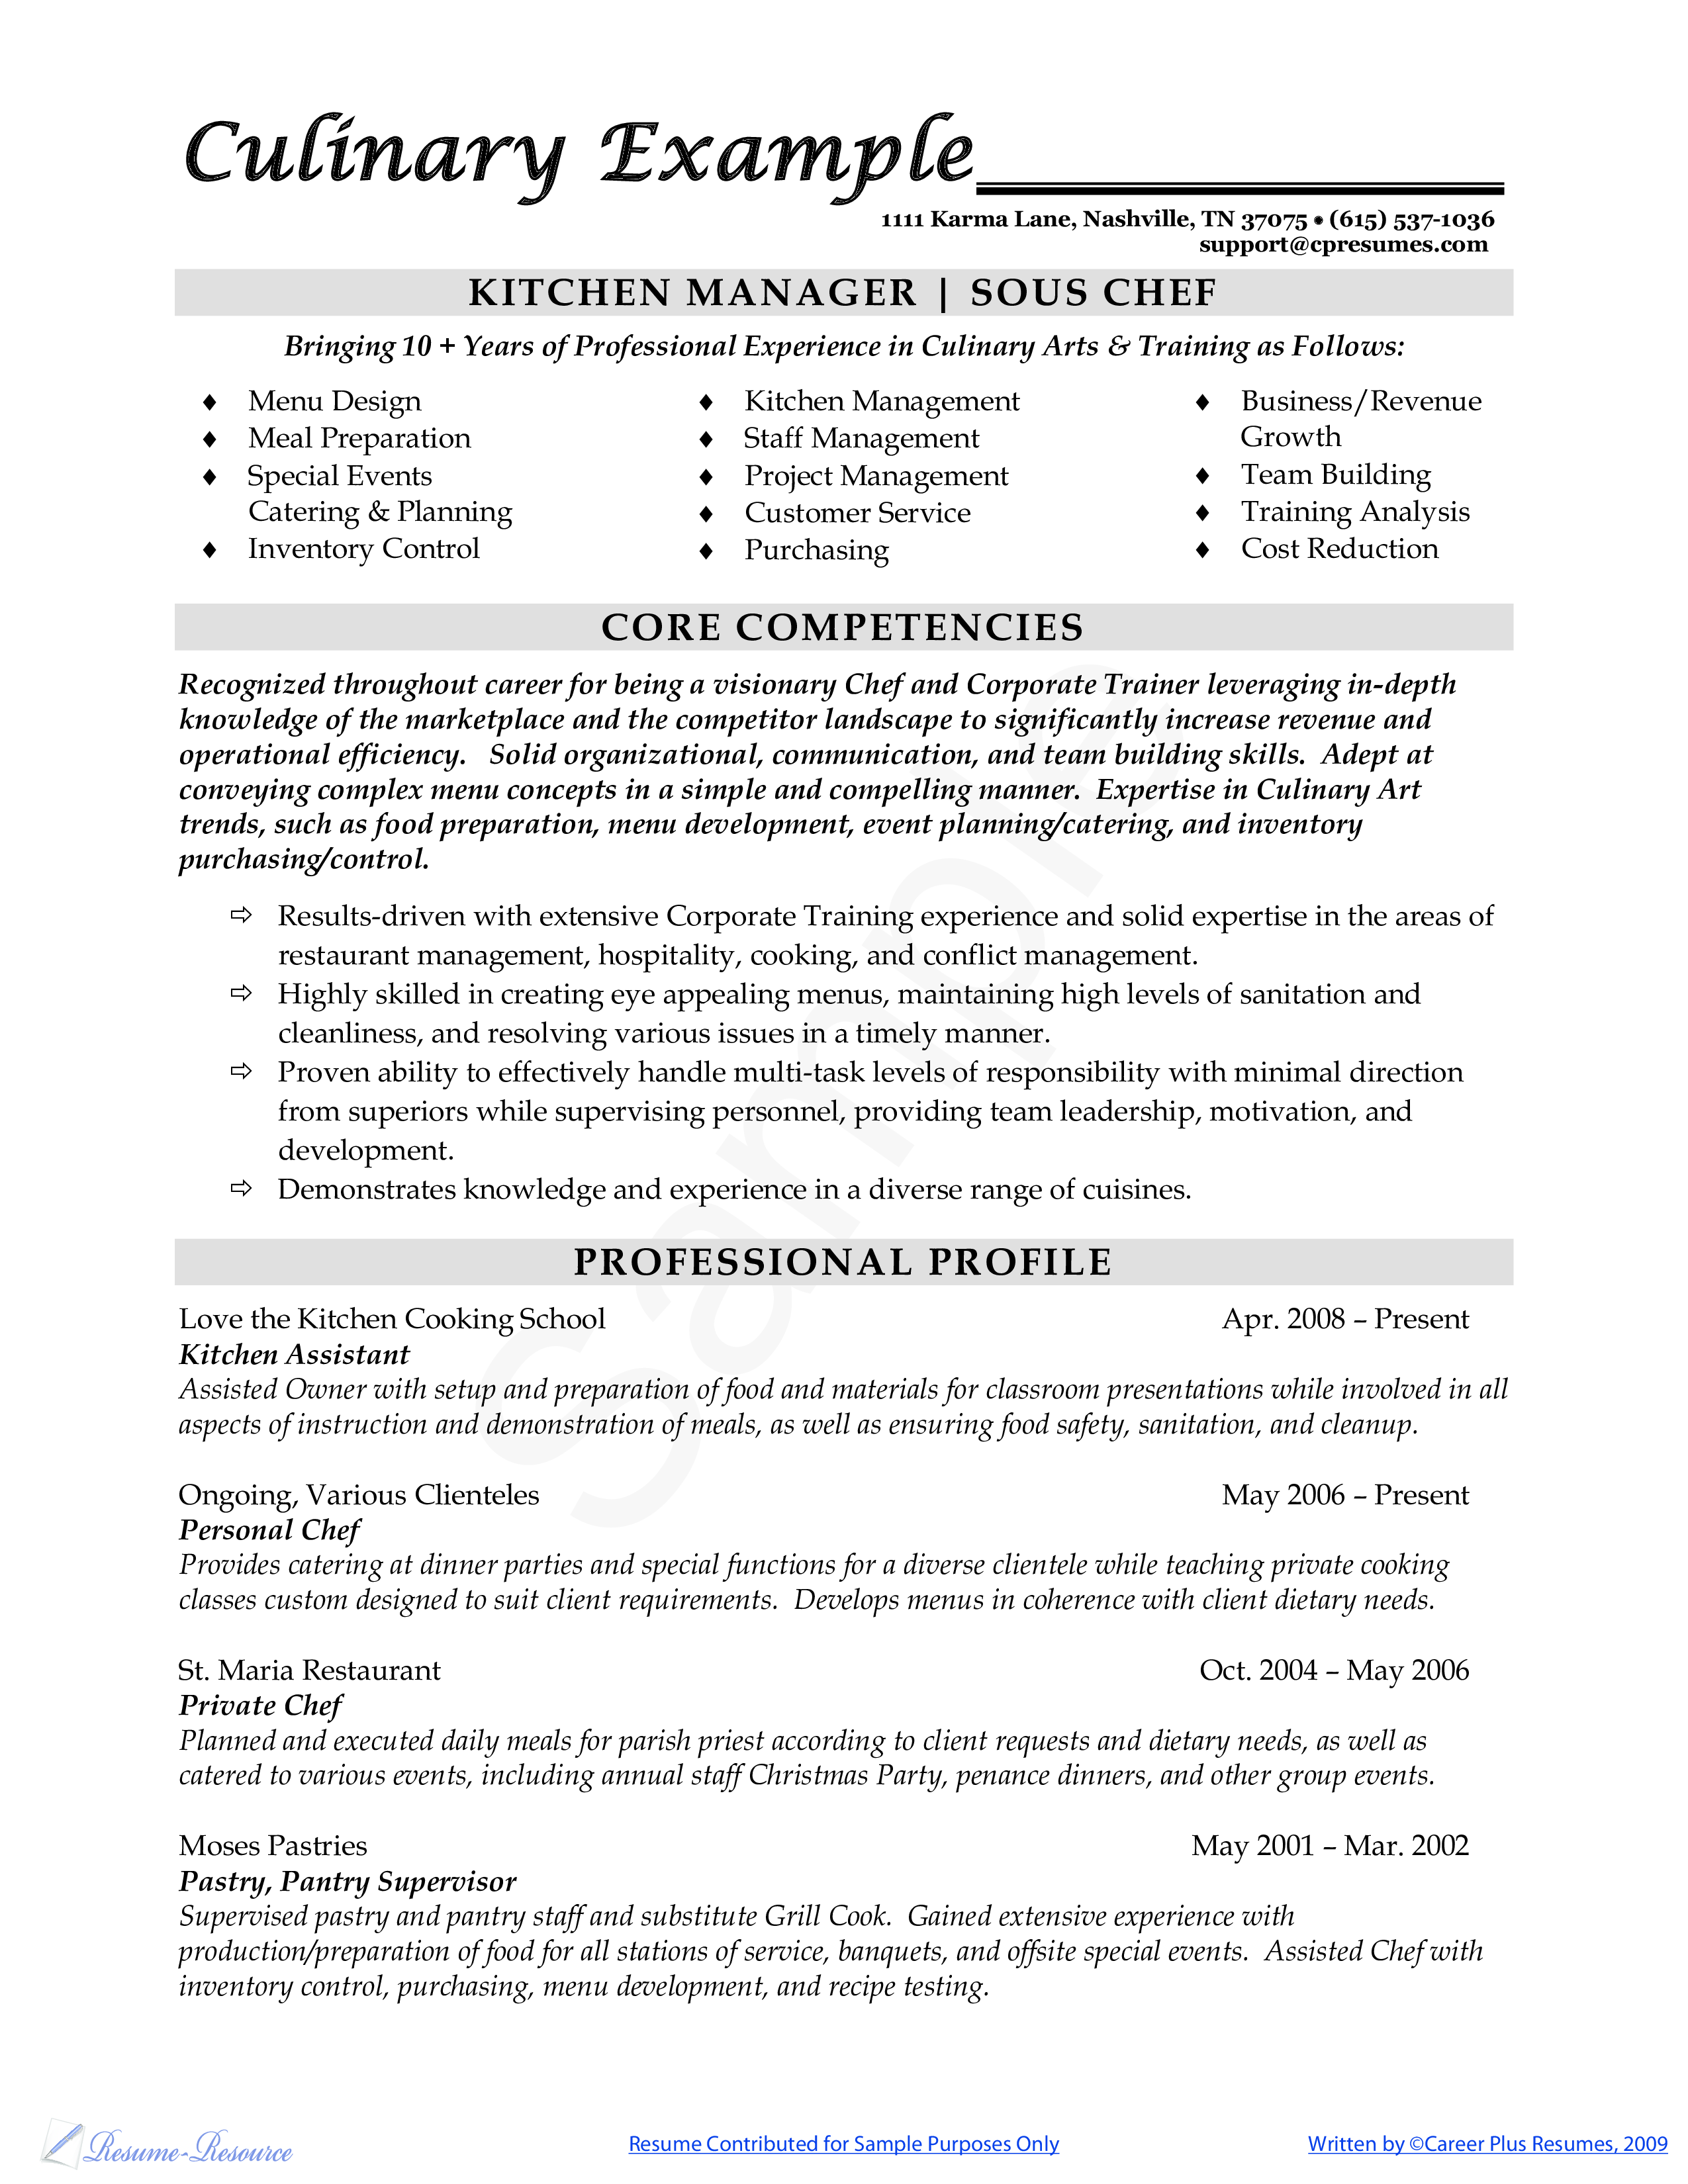 Sous Chef Resume Sample Templates At